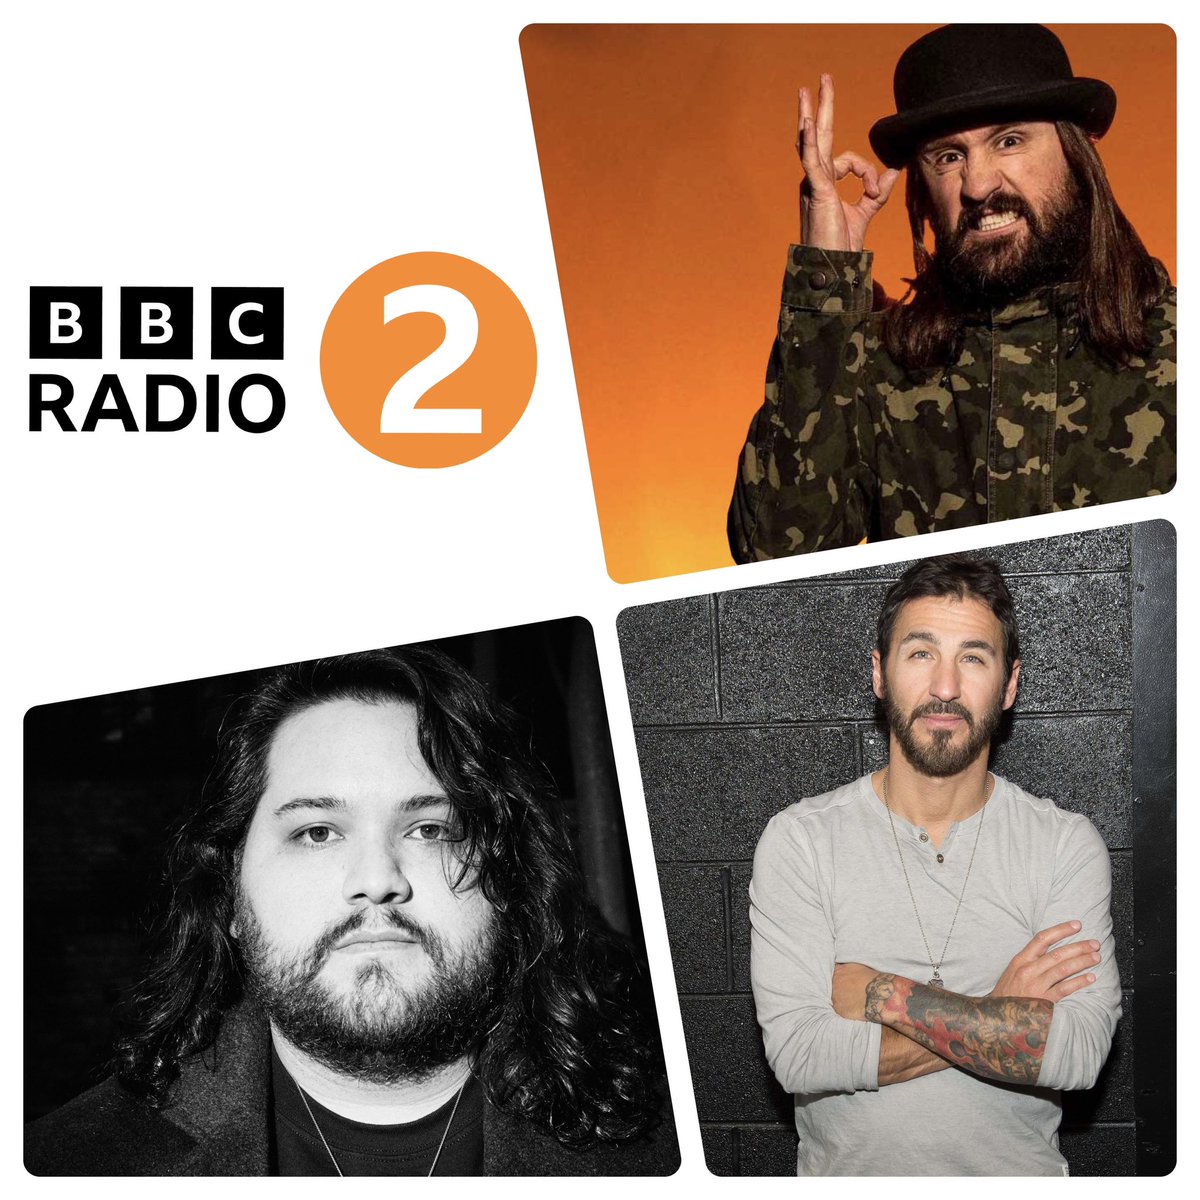 Tune in tonight’s @BBCRadio2 #rockshow from 11pm to hear @SullyErna from @godsmack choosing his #rockgod 🤘 You can also listen back to last weeks show featuring brand new @MammothWVH + Baz @MassiveWagons choosing his #rockgod via @BBCSounds ⚡️📻📱🎧💻⚡️